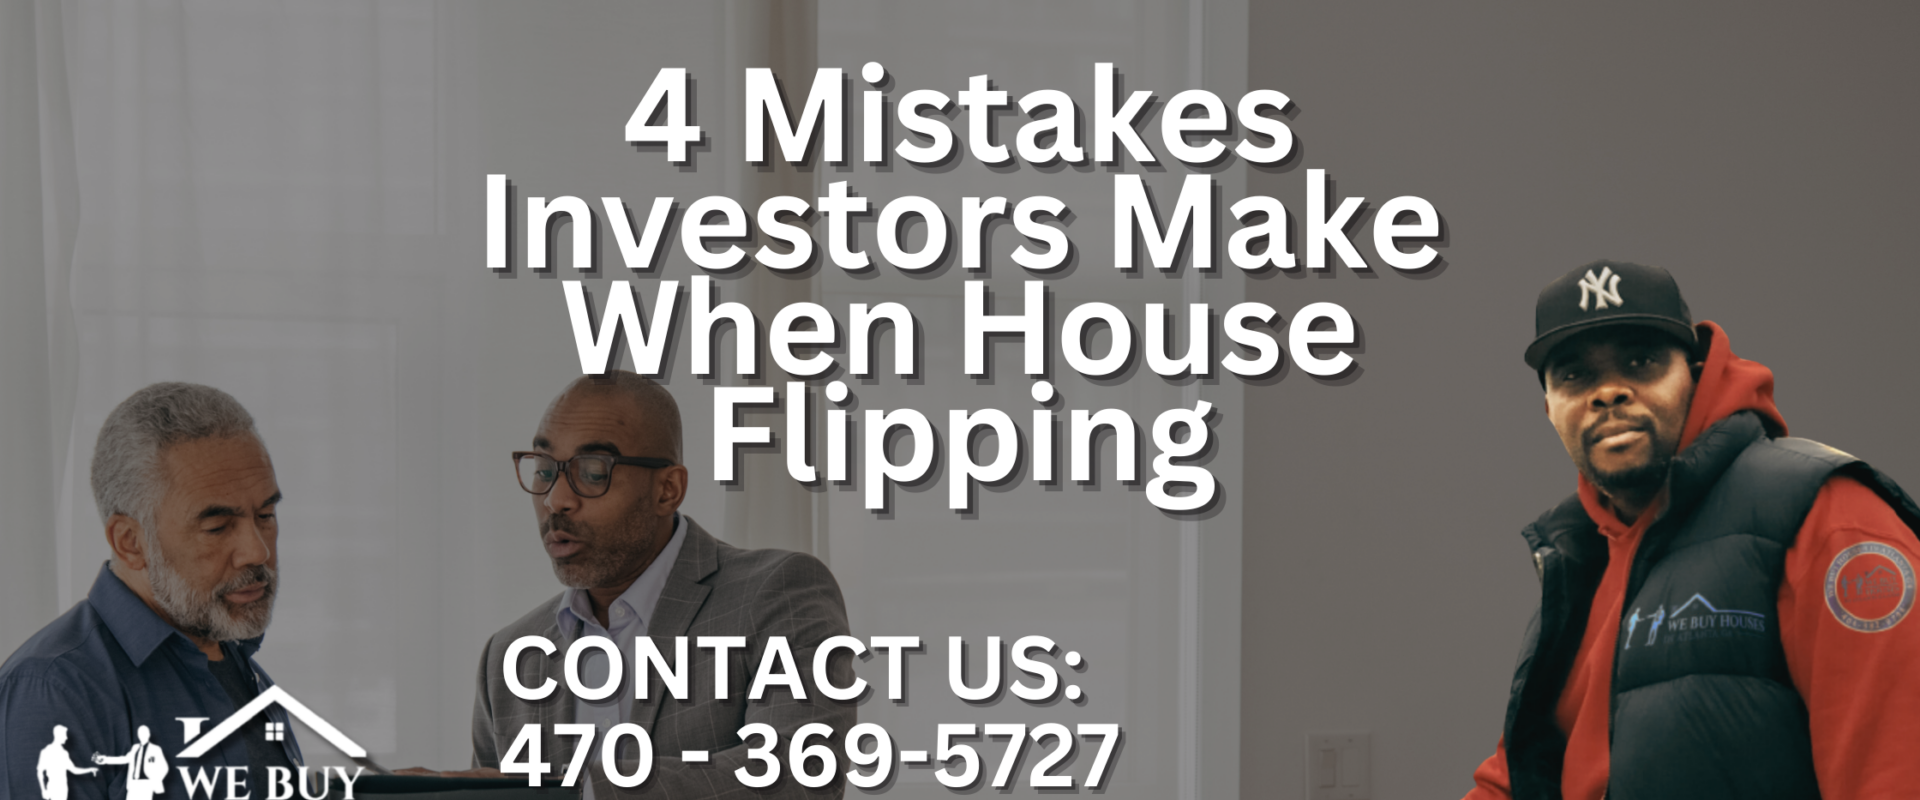 4-Mistakes-Investors-Make-When-House-Flipping